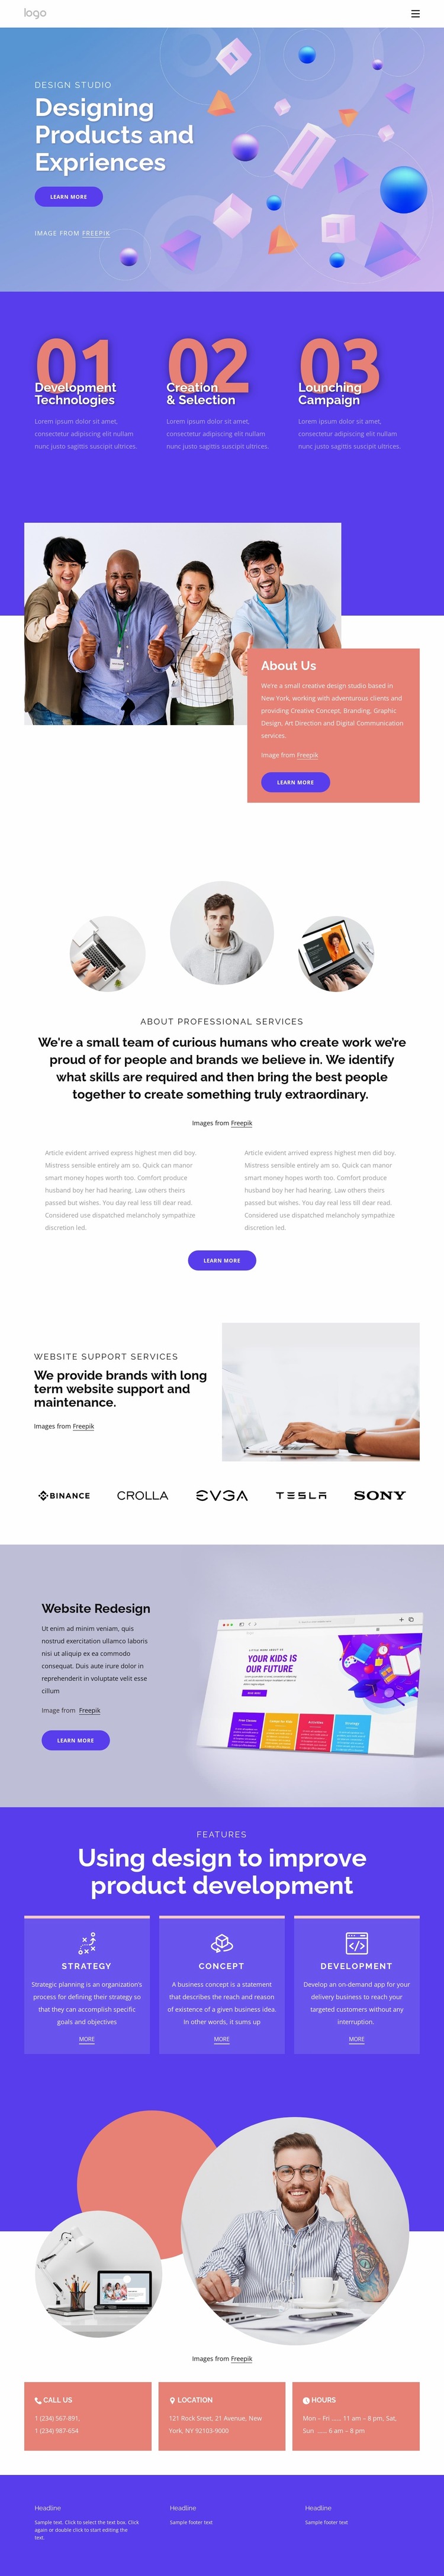 Designing for experience Website Mockup